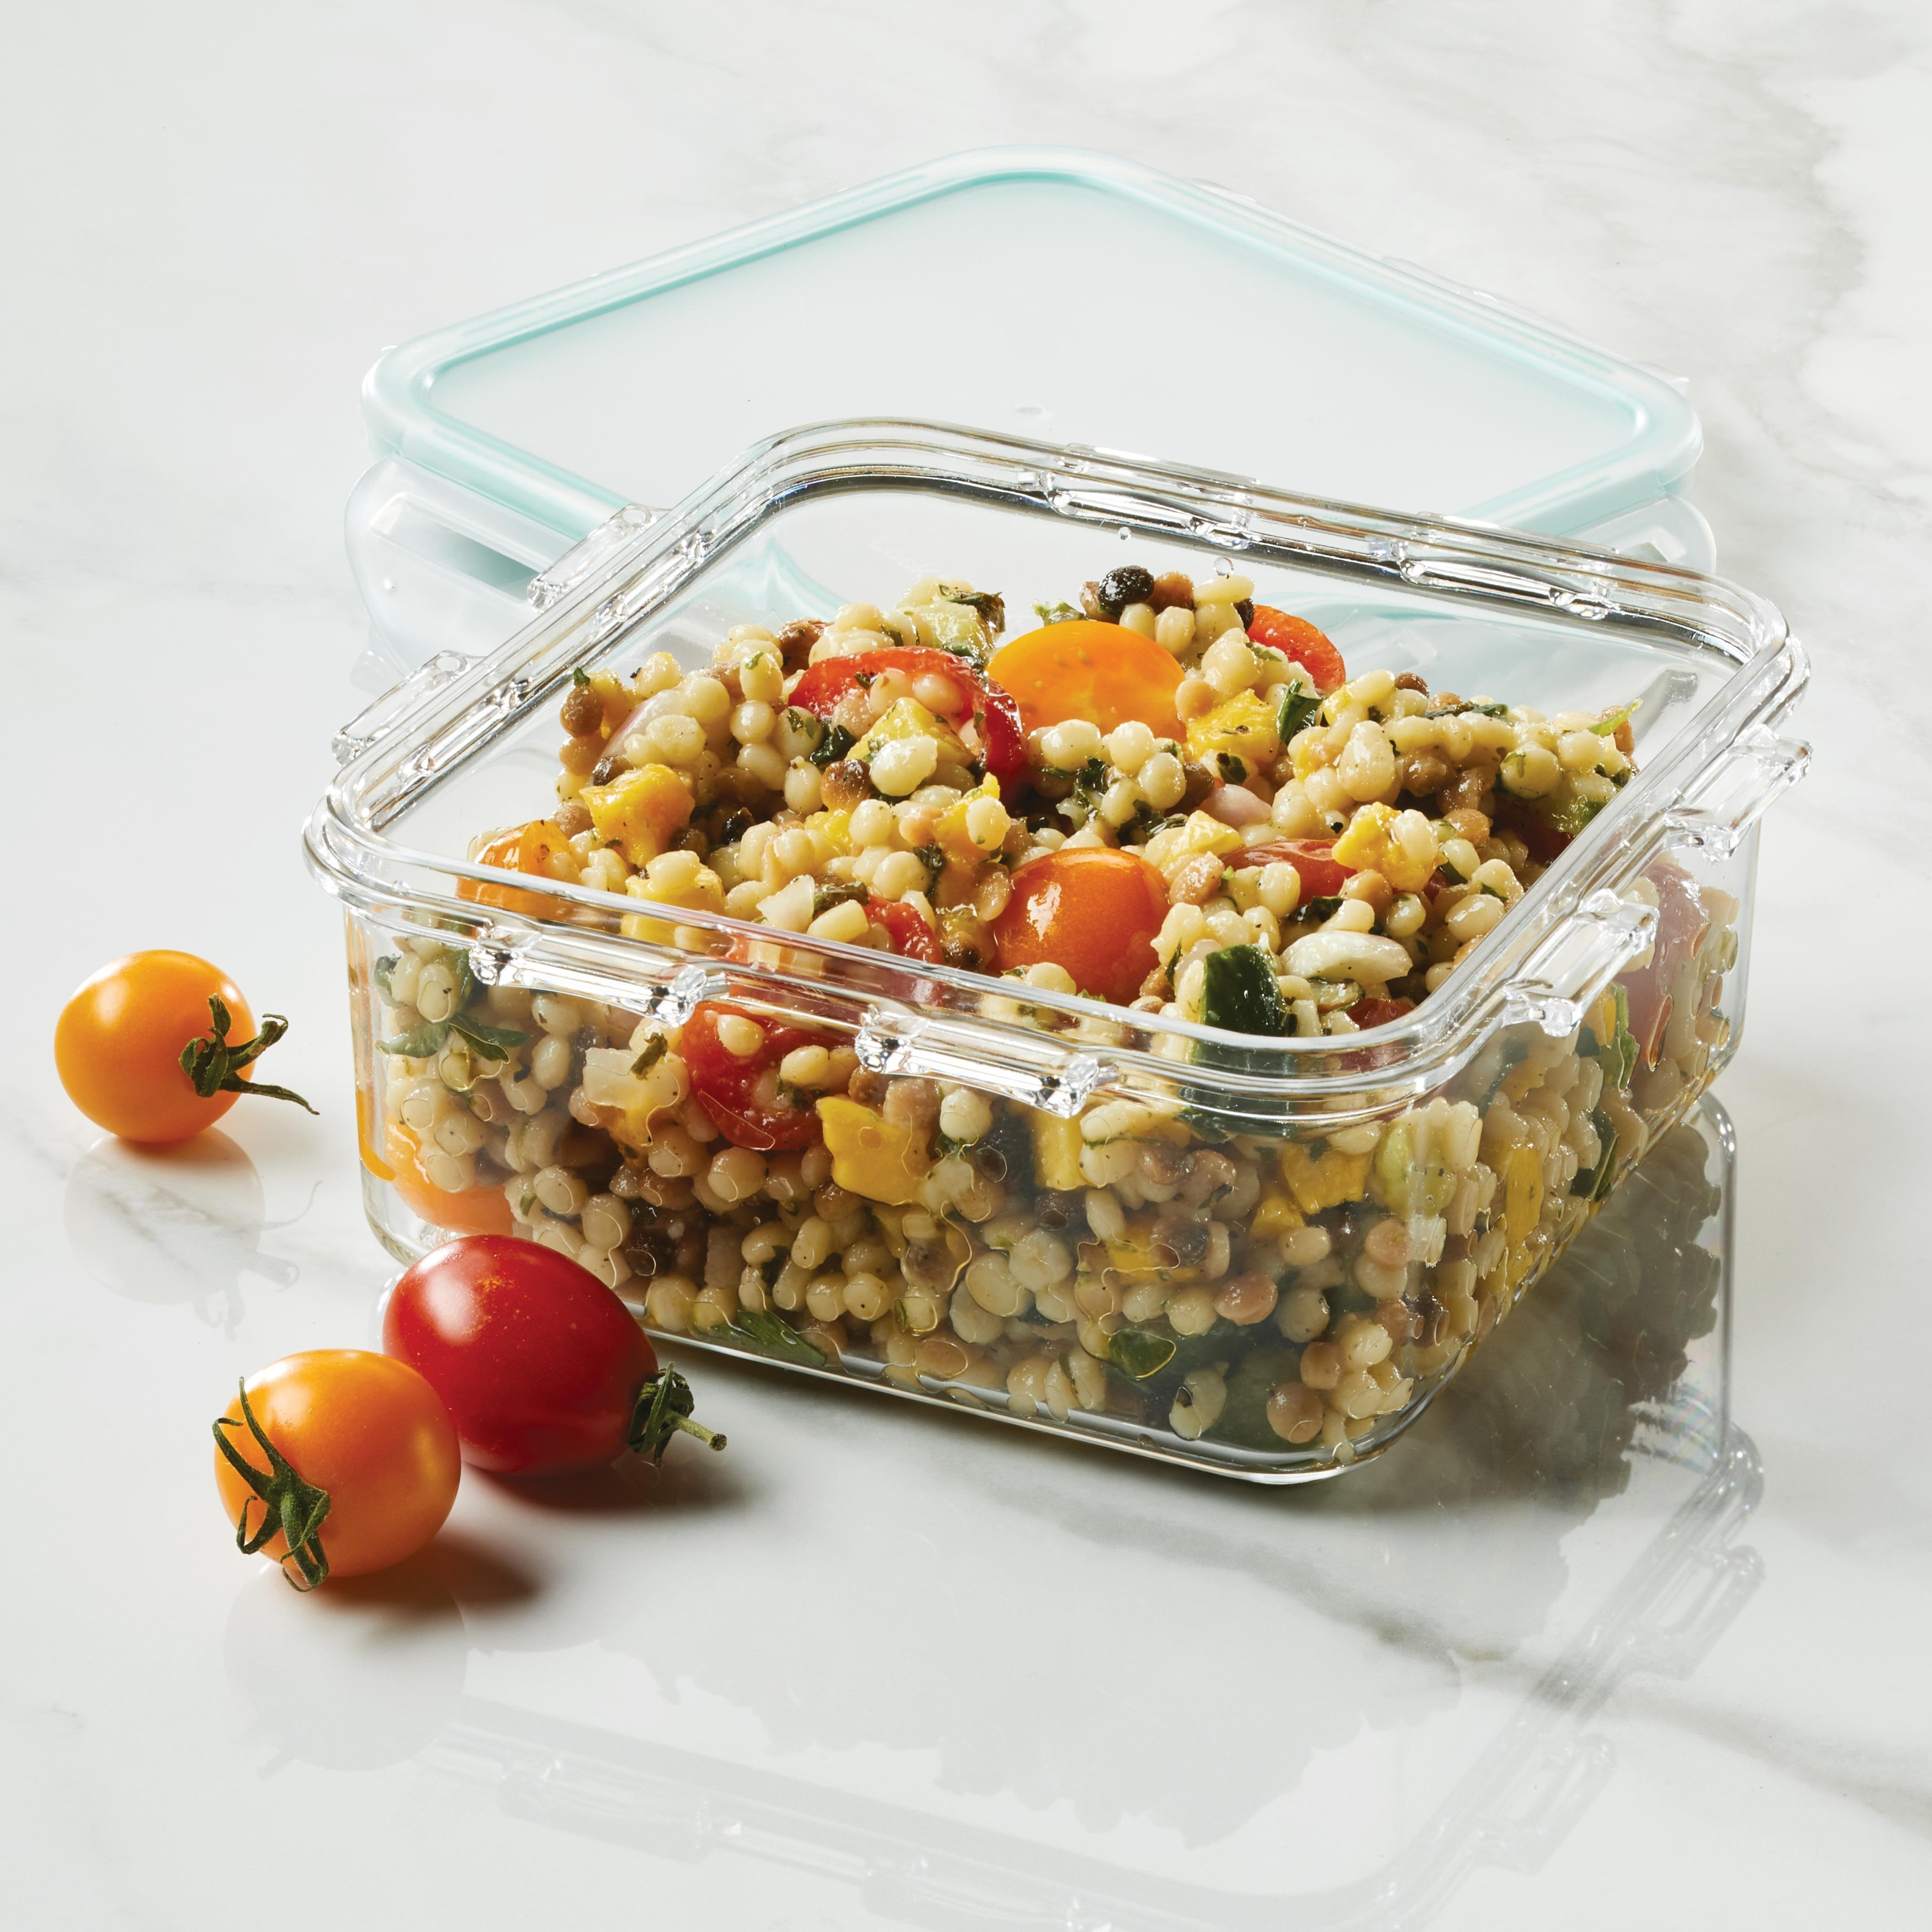 https://ak1.ostkcdn.com/images/products/is/images/direct/cc778aabe556eeec7935d6461afb33e5223b743a/LocknLock-Purely-Better-Food-Storage-Containers-20oz-4-PC-Set.jpg